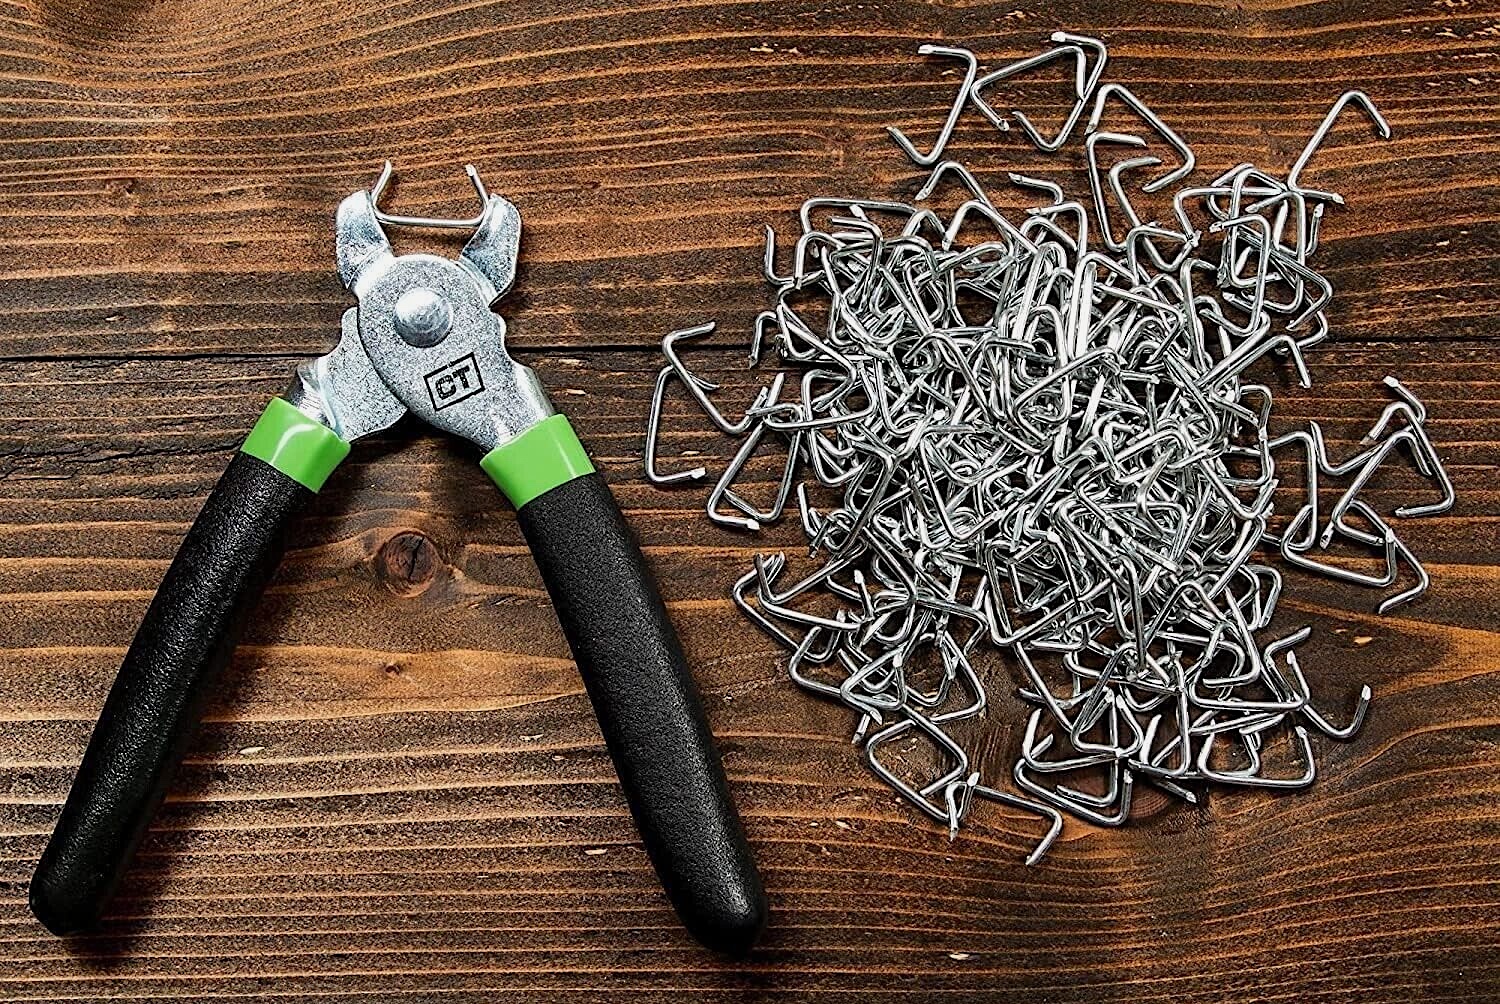 Hog ring pliers and a pile of rings